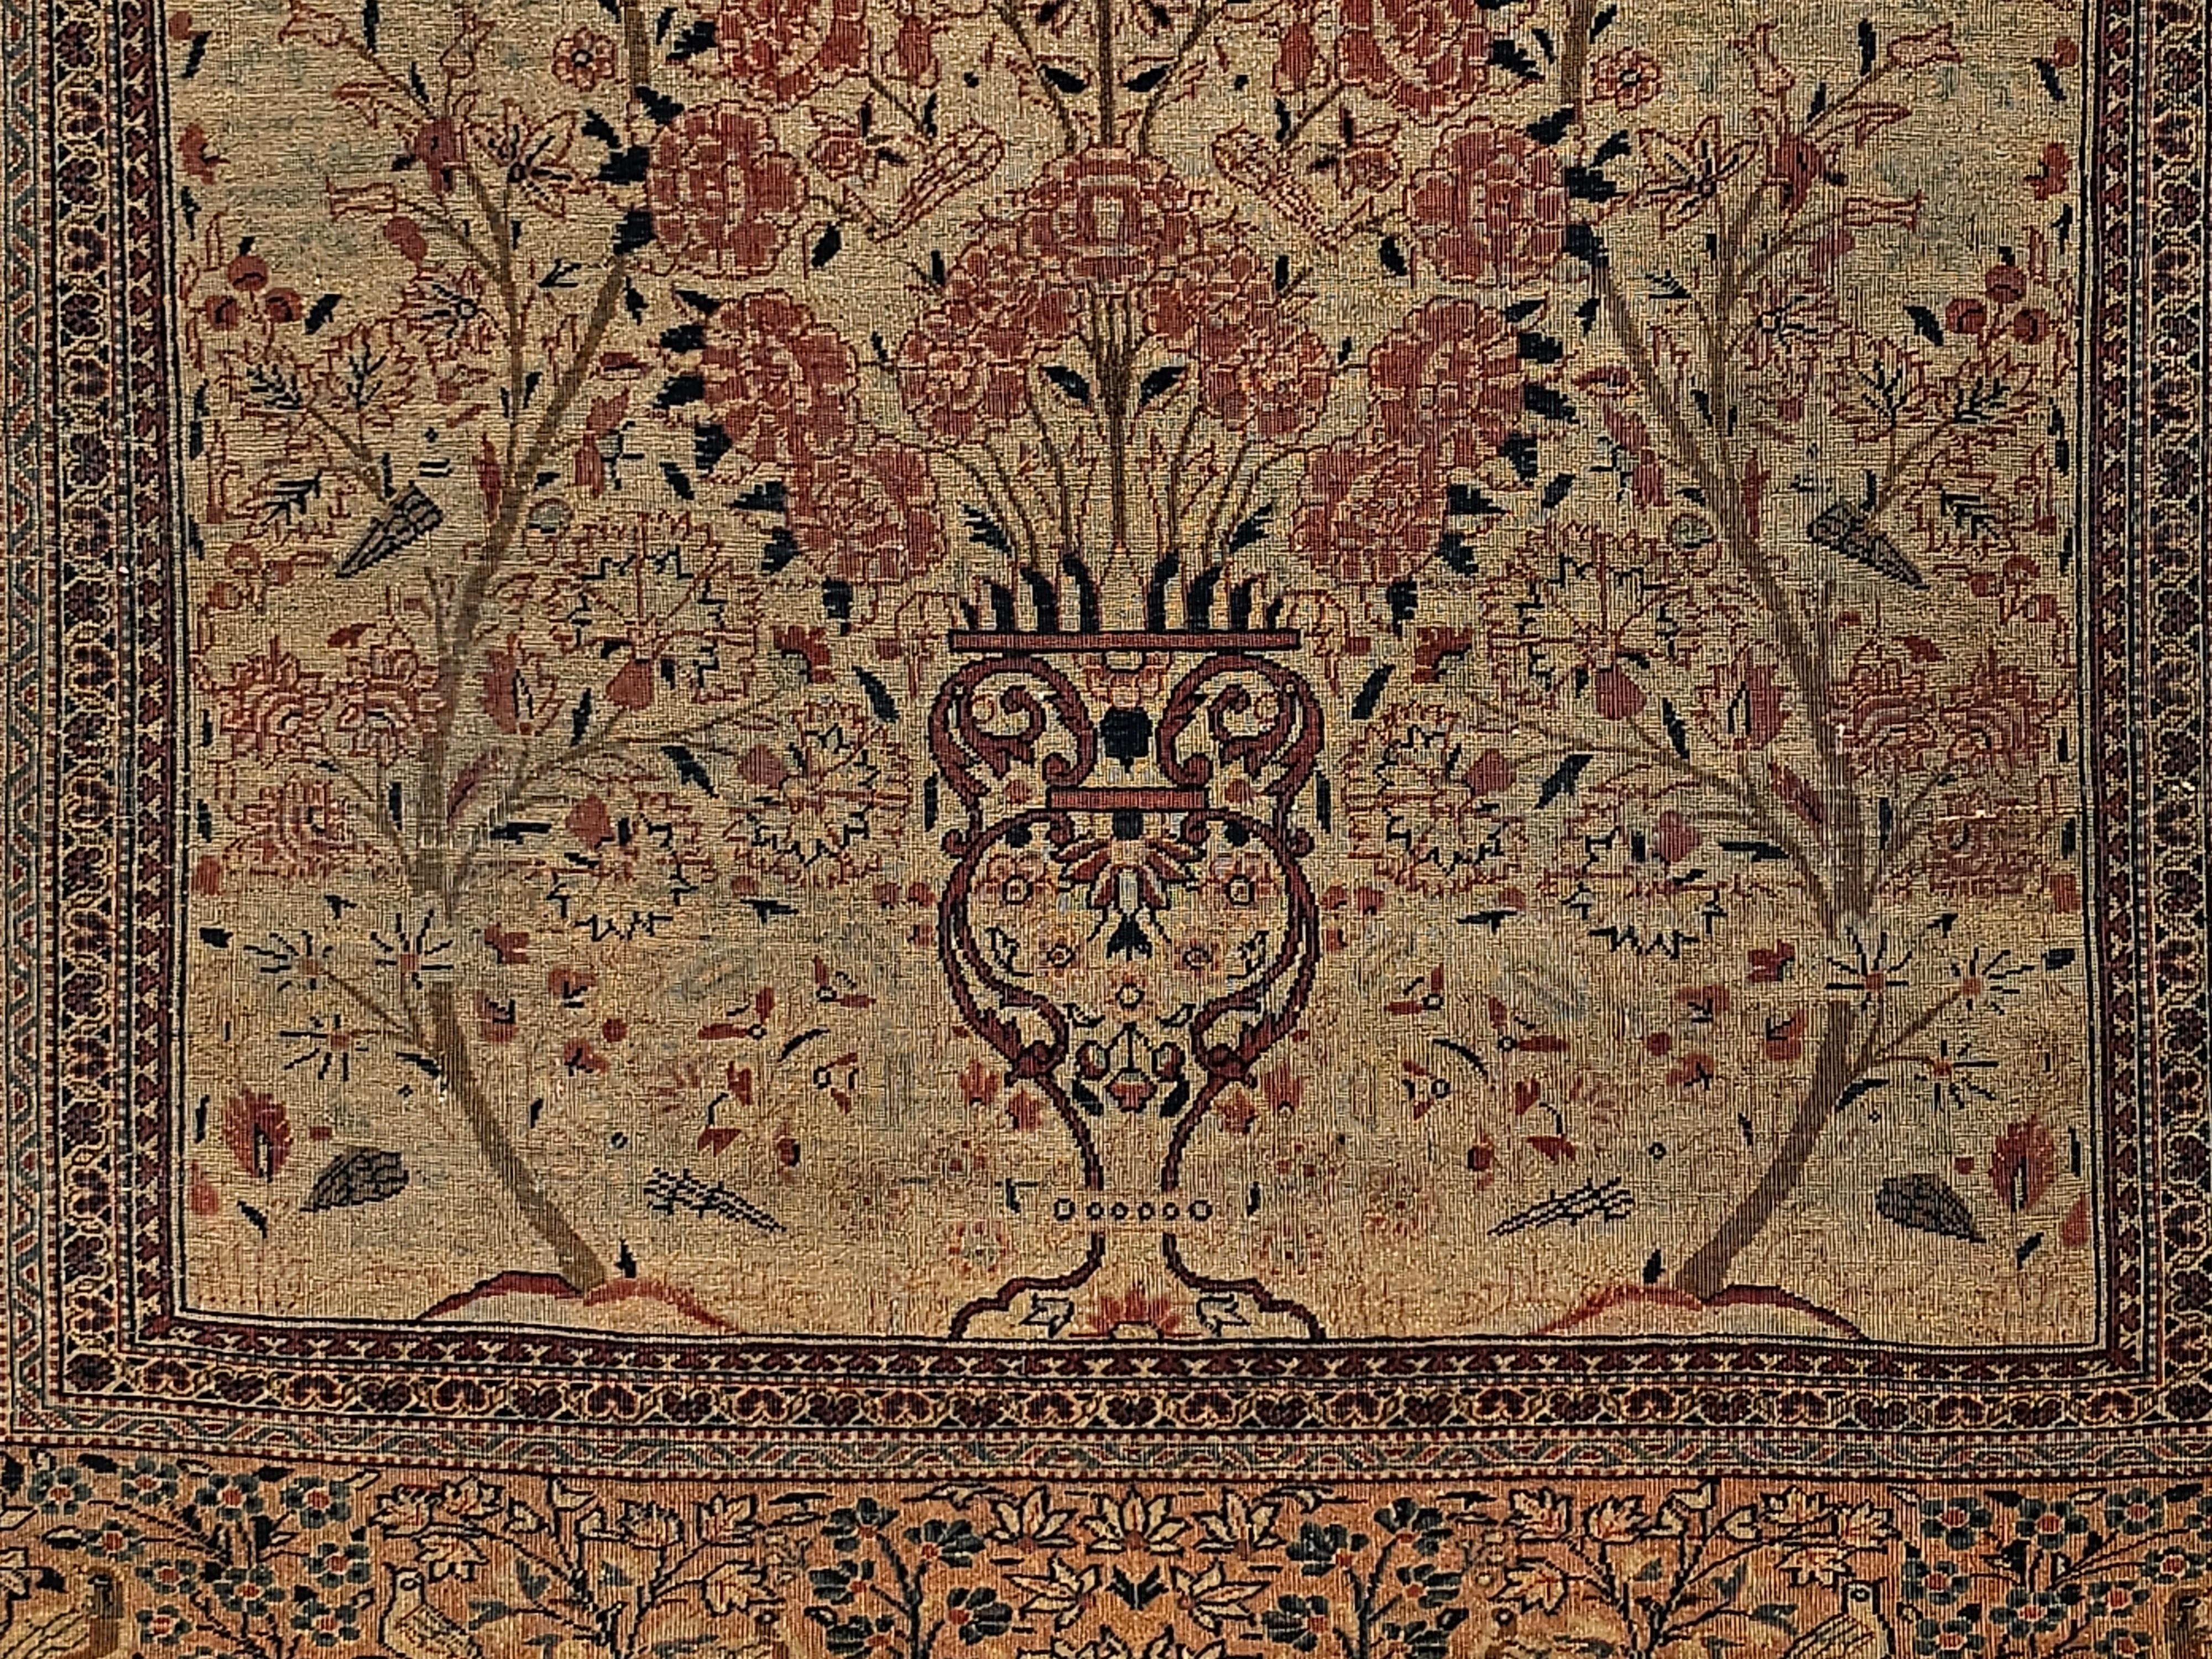 Cotton 19th Century Persian Kashan “Tree of Life” Vase Rug in Ivory, Brick Red, Navy For Sale